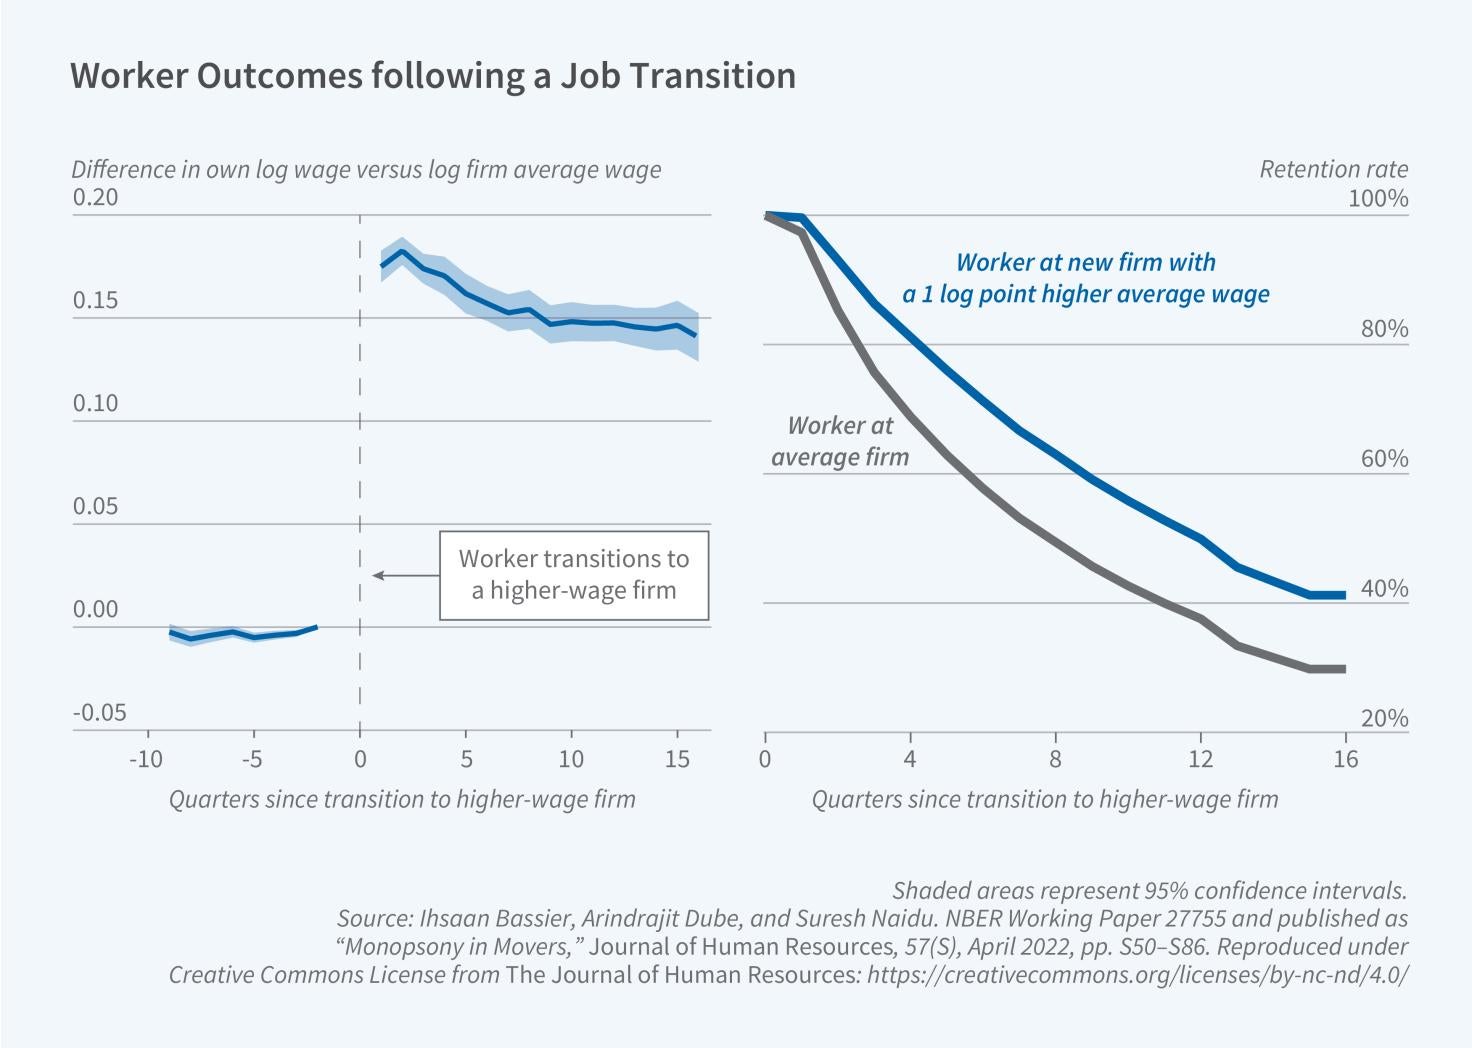 Monopsony Power in Labor Markets image